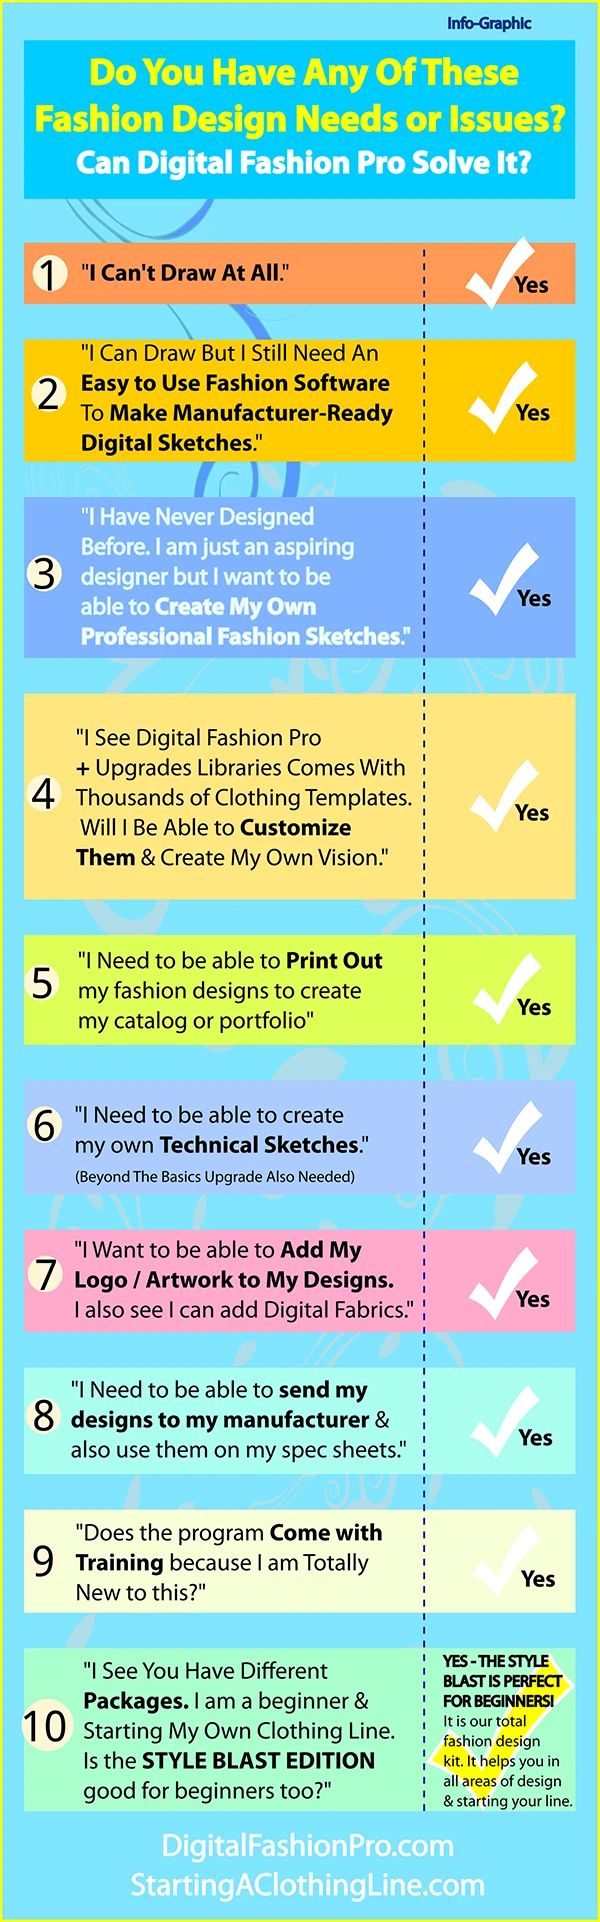 Digital Fashion Pro Free Trial - Infographic - free download